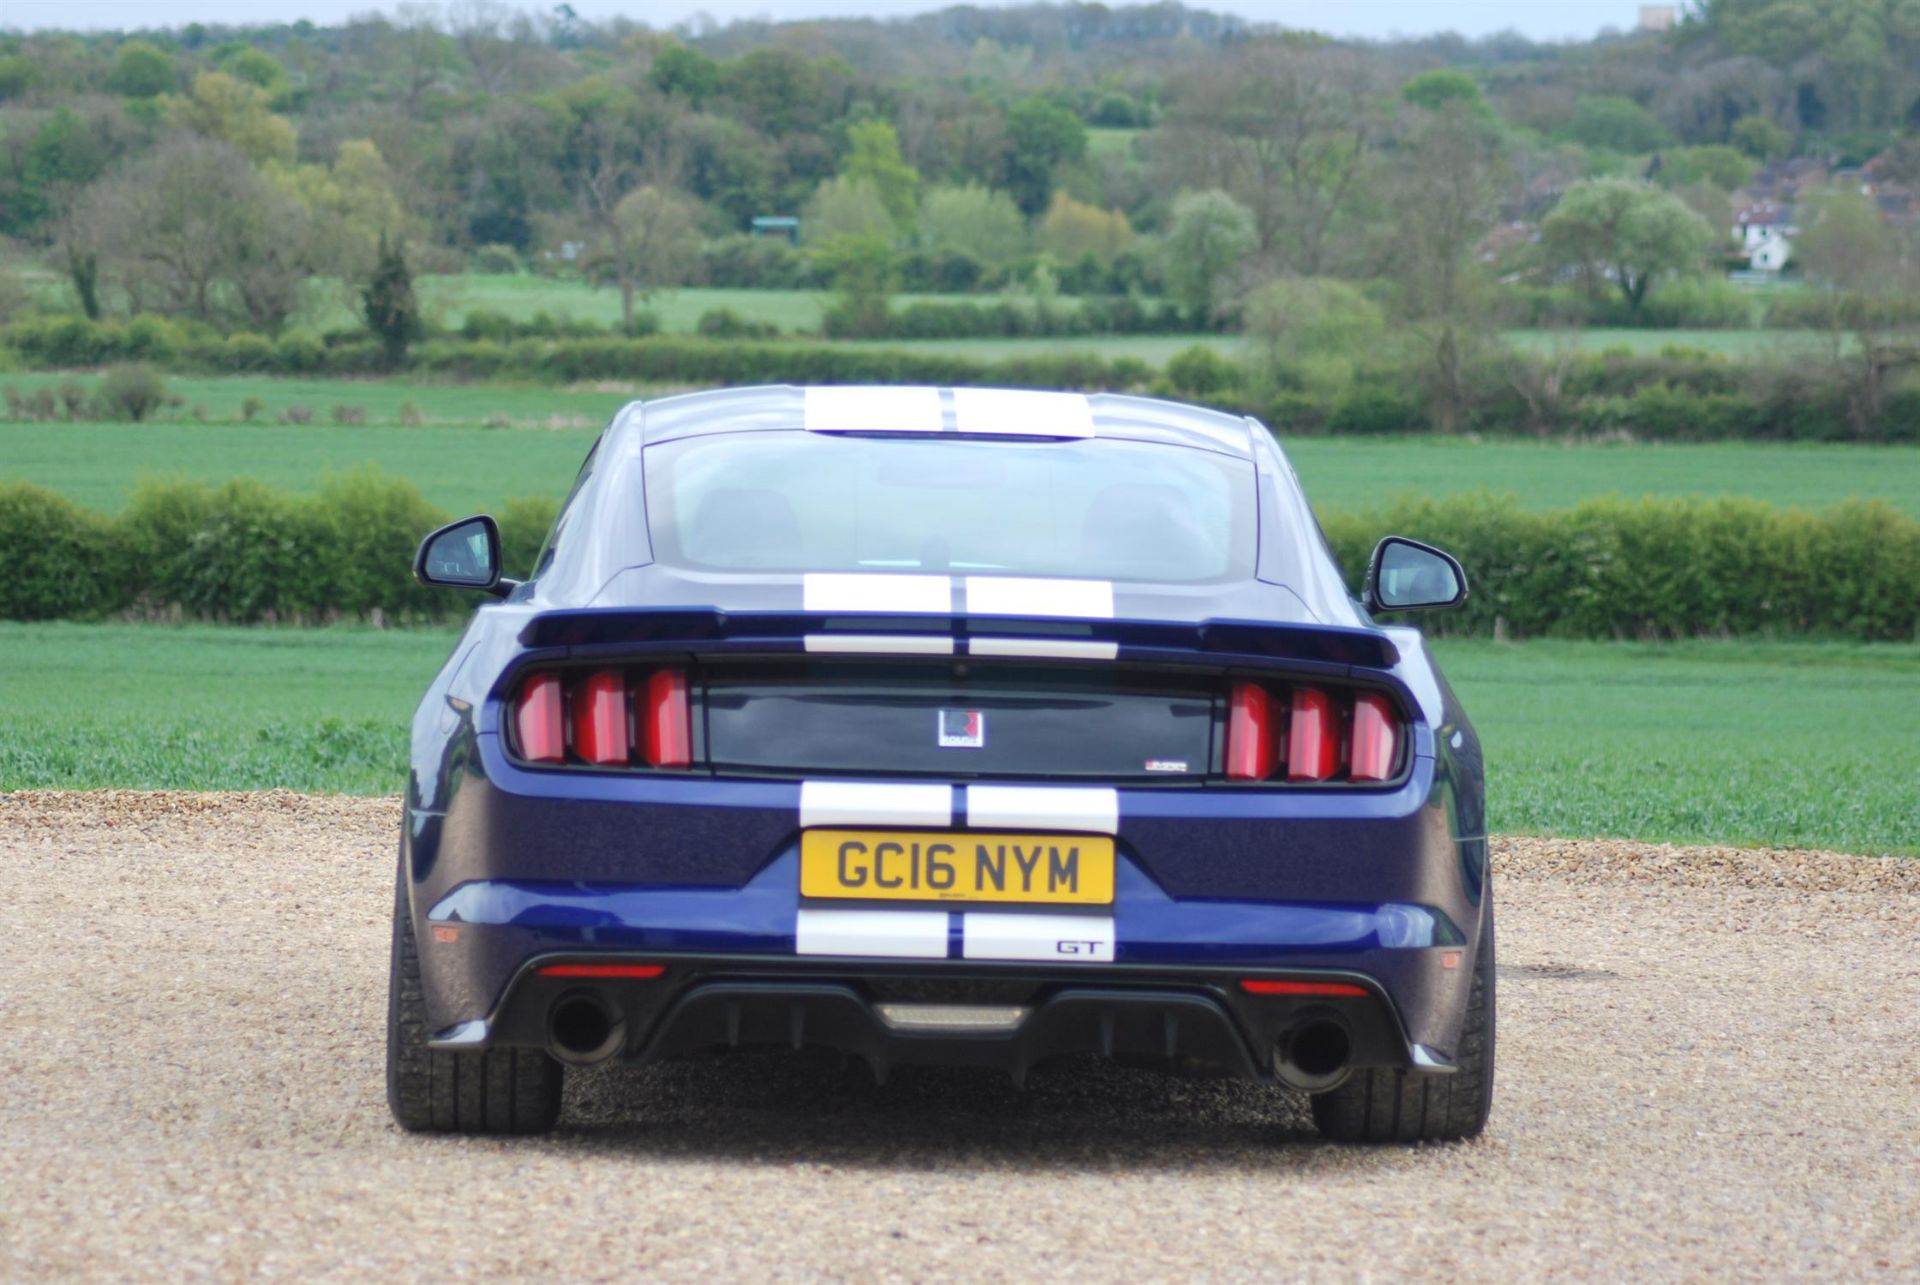 2016 Ford Mustang 5.0-Litre V8 GT S550 Roush Supercharged - Image 7 of 10